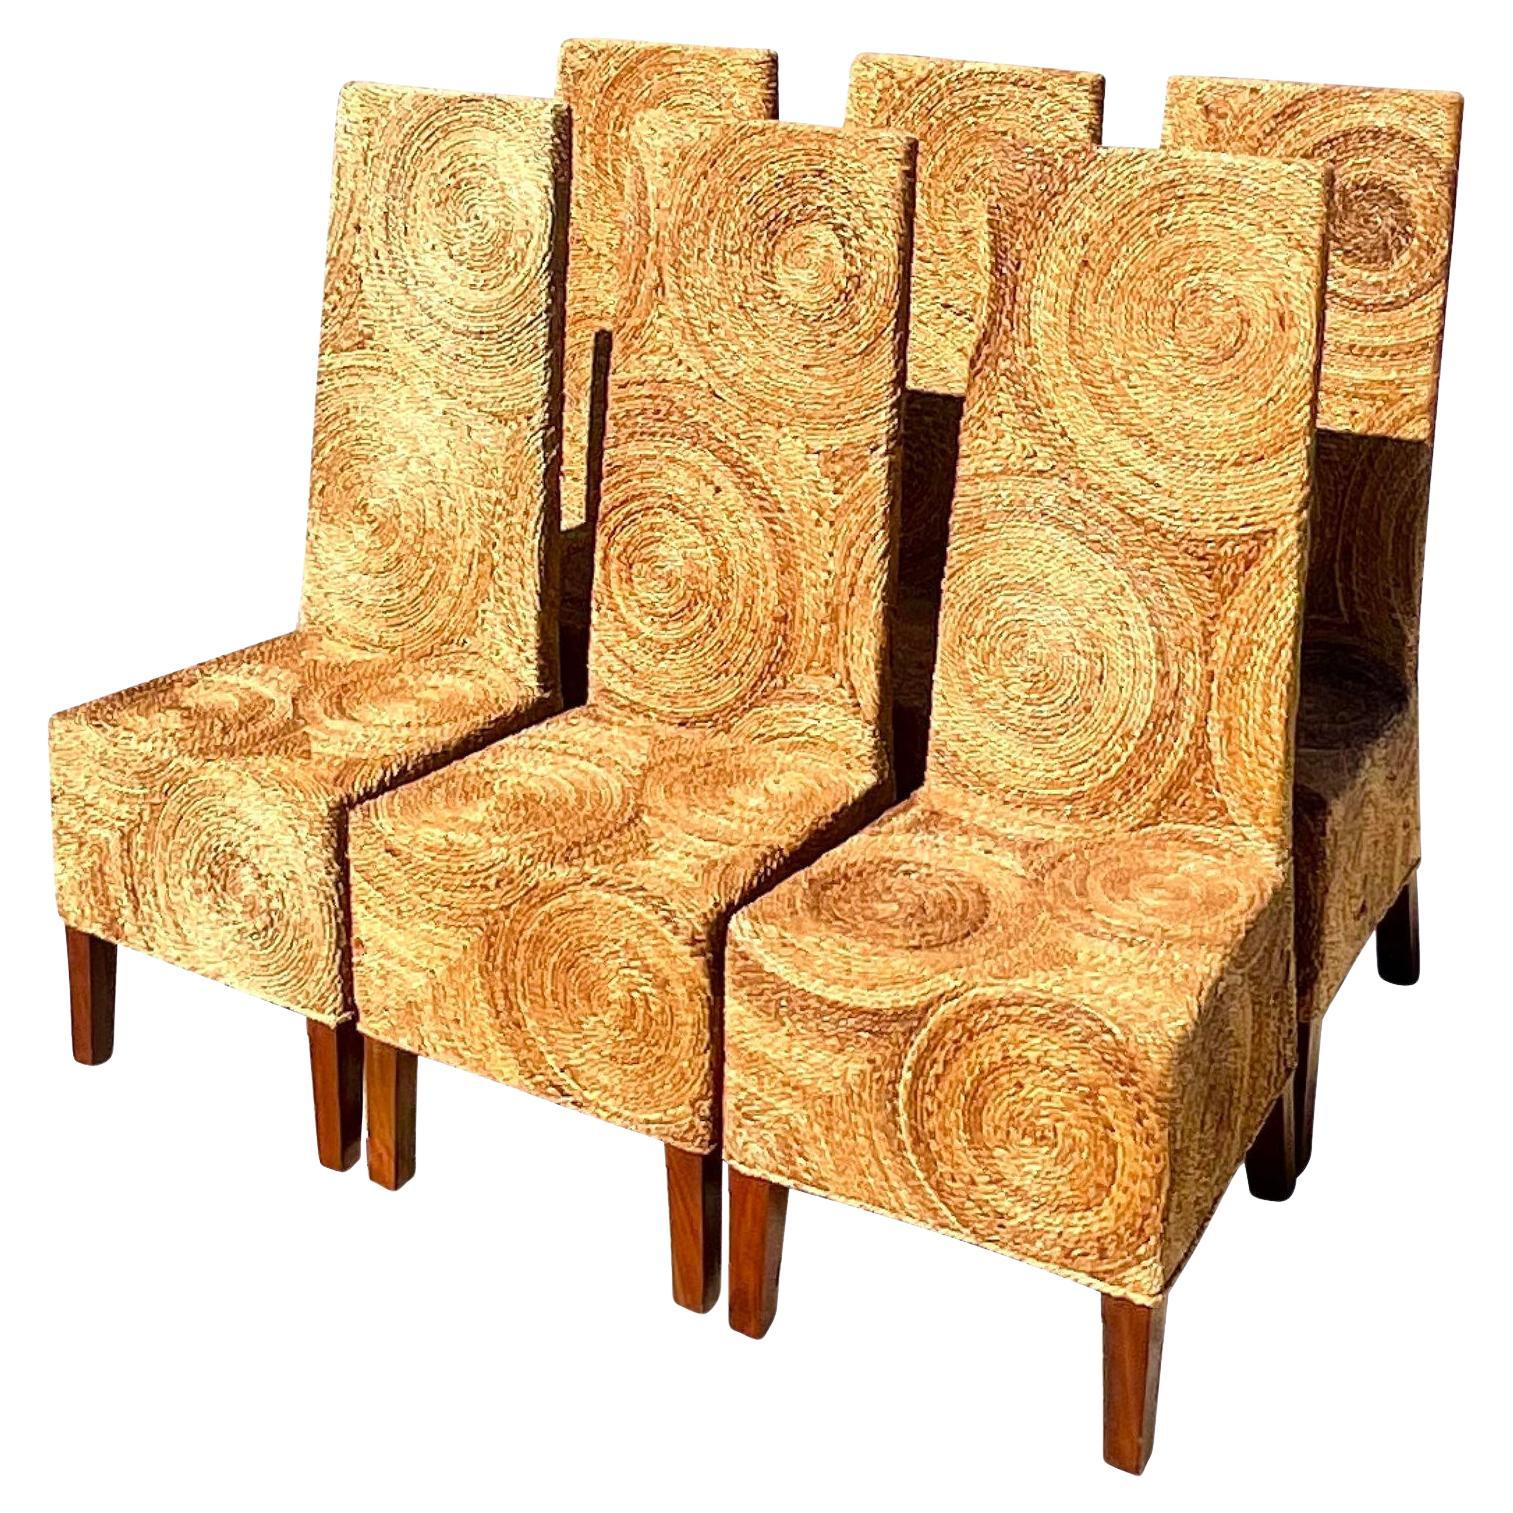 Vintage Coastal Twisted Rattan Circles Dining Chairs - Set of 6 For Sale